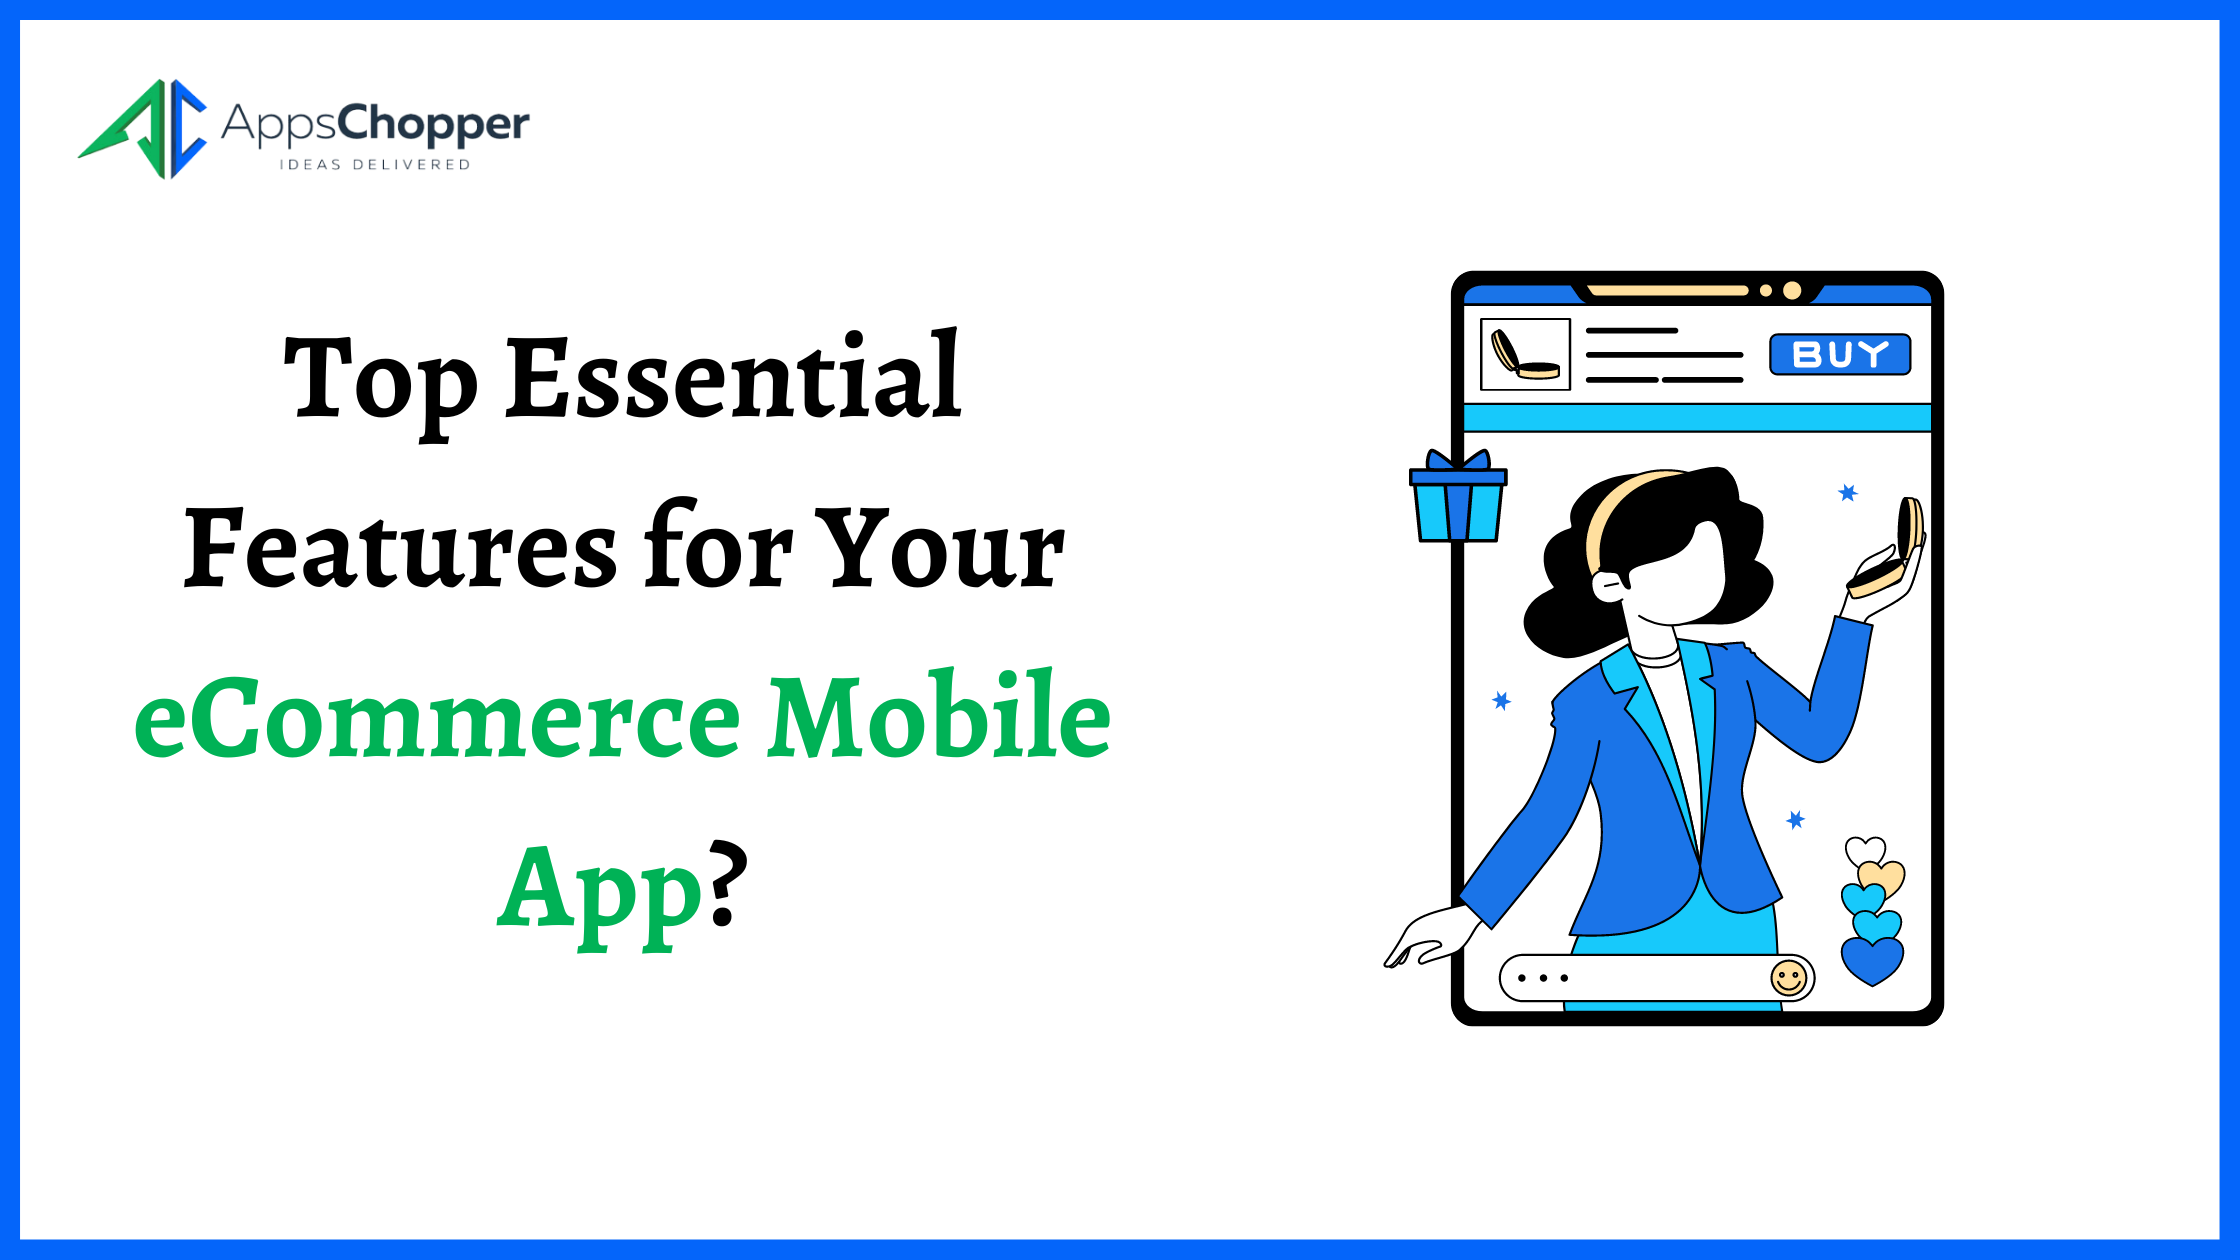 Top Essential features for your eCommerce mobile app